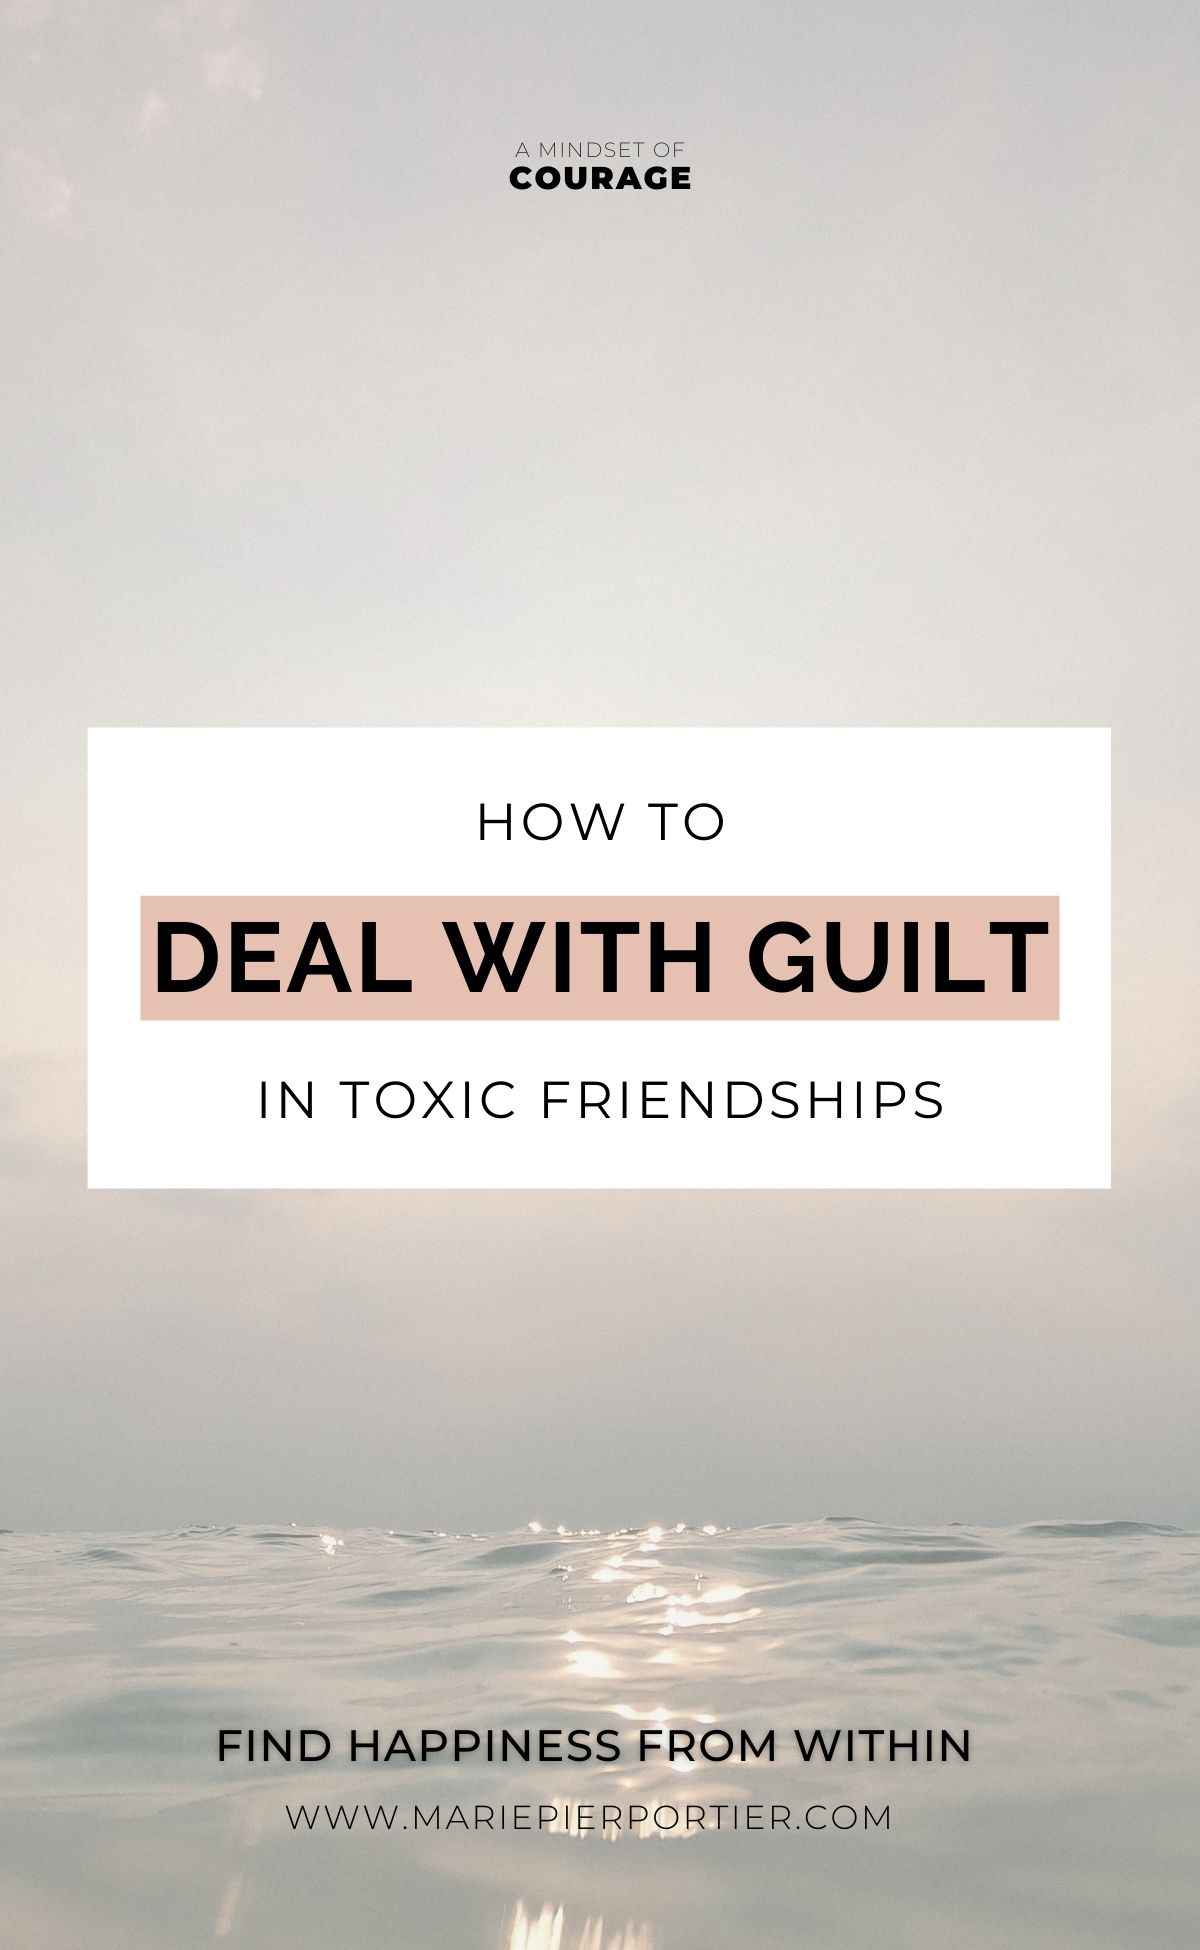 How to Deal with Guilt in Toxic Friendships